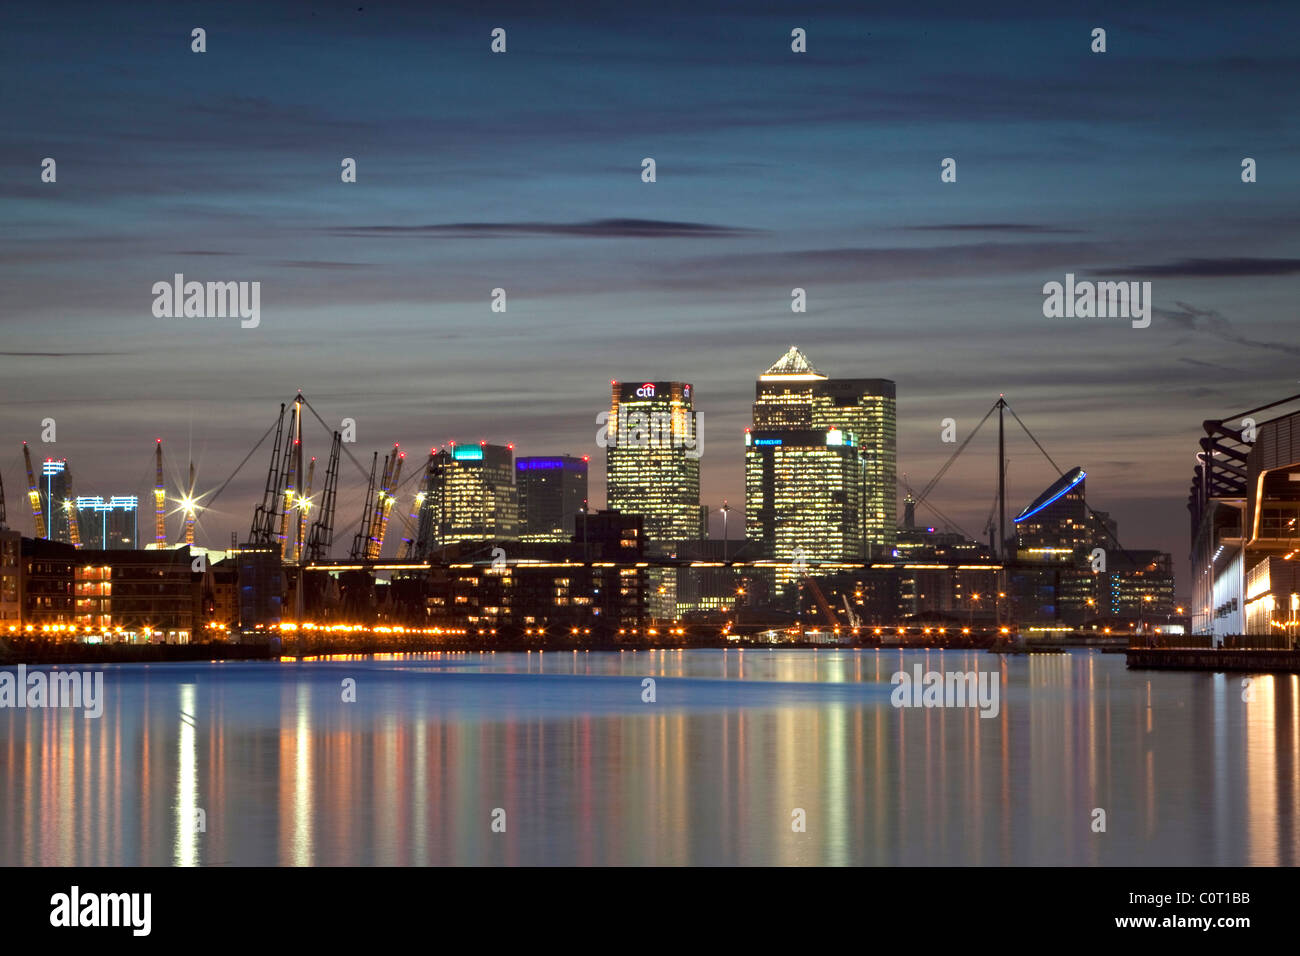 Isle of Dogs, Londons financial centre at dusk reflected in the waters of the Royal Victoria Dock Stock Photo